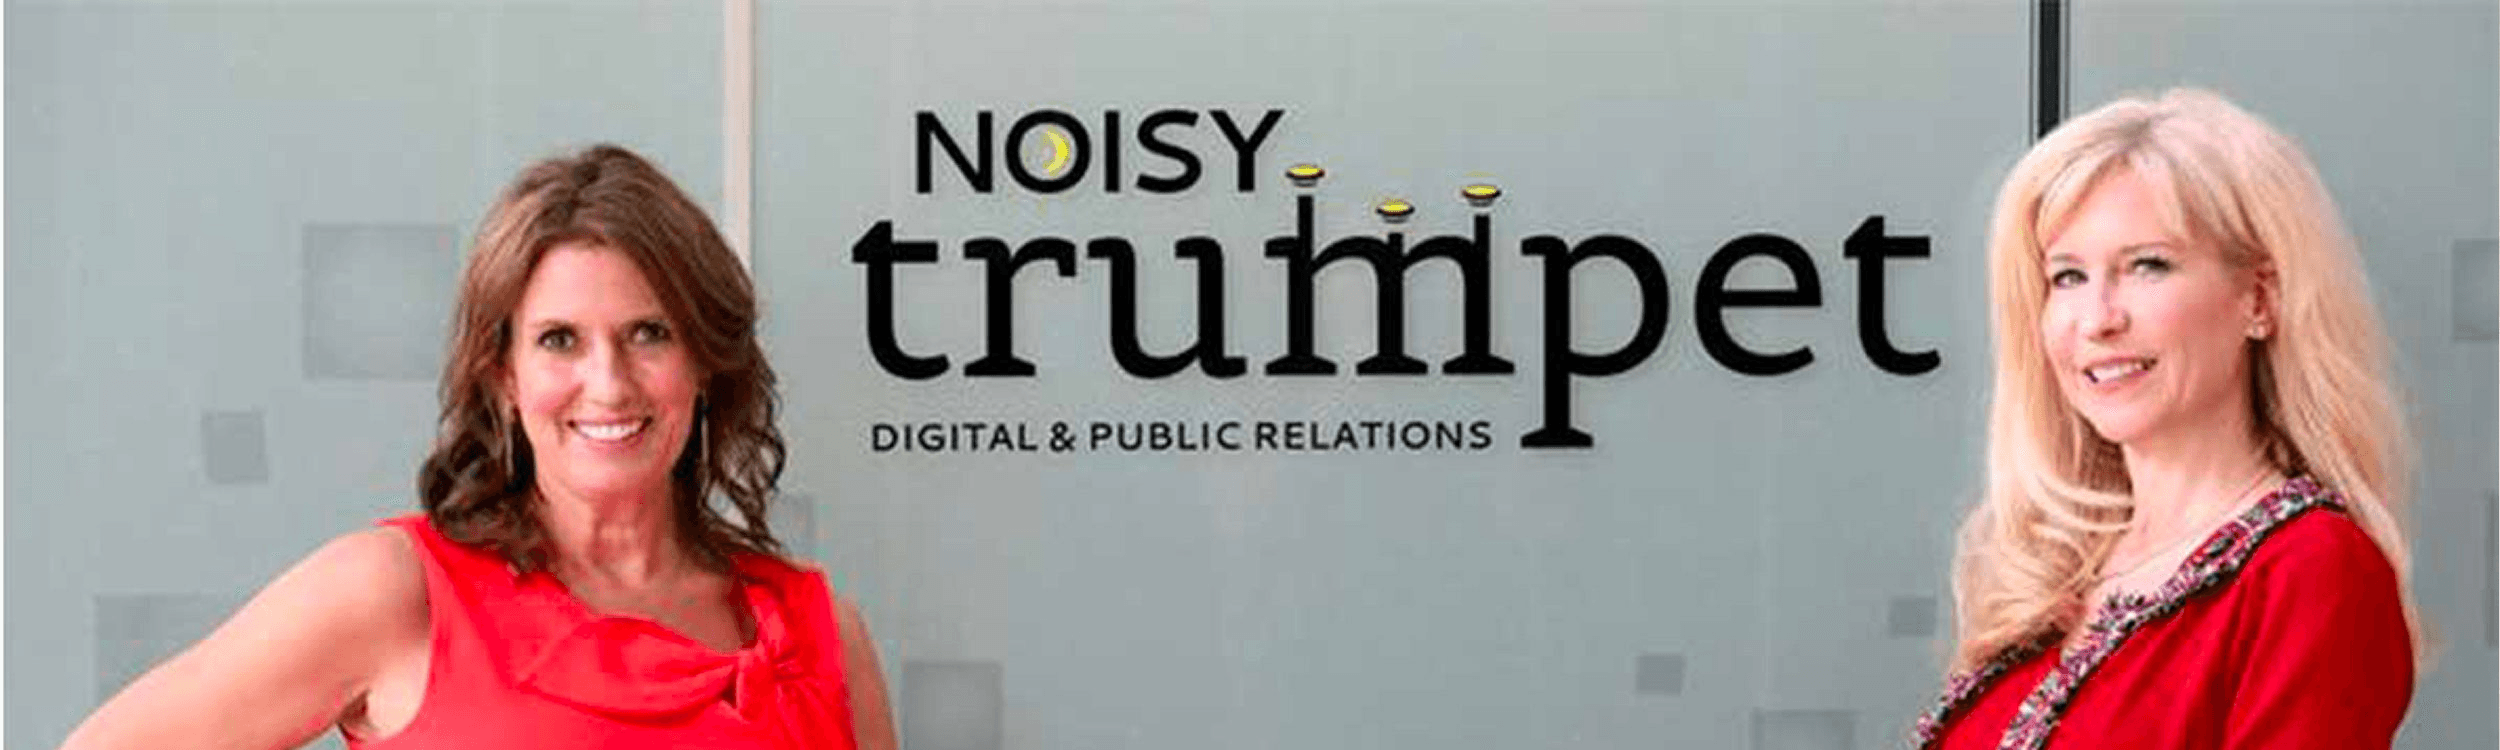 Noisy Trumpet Featured in the San Antonio Business Journal